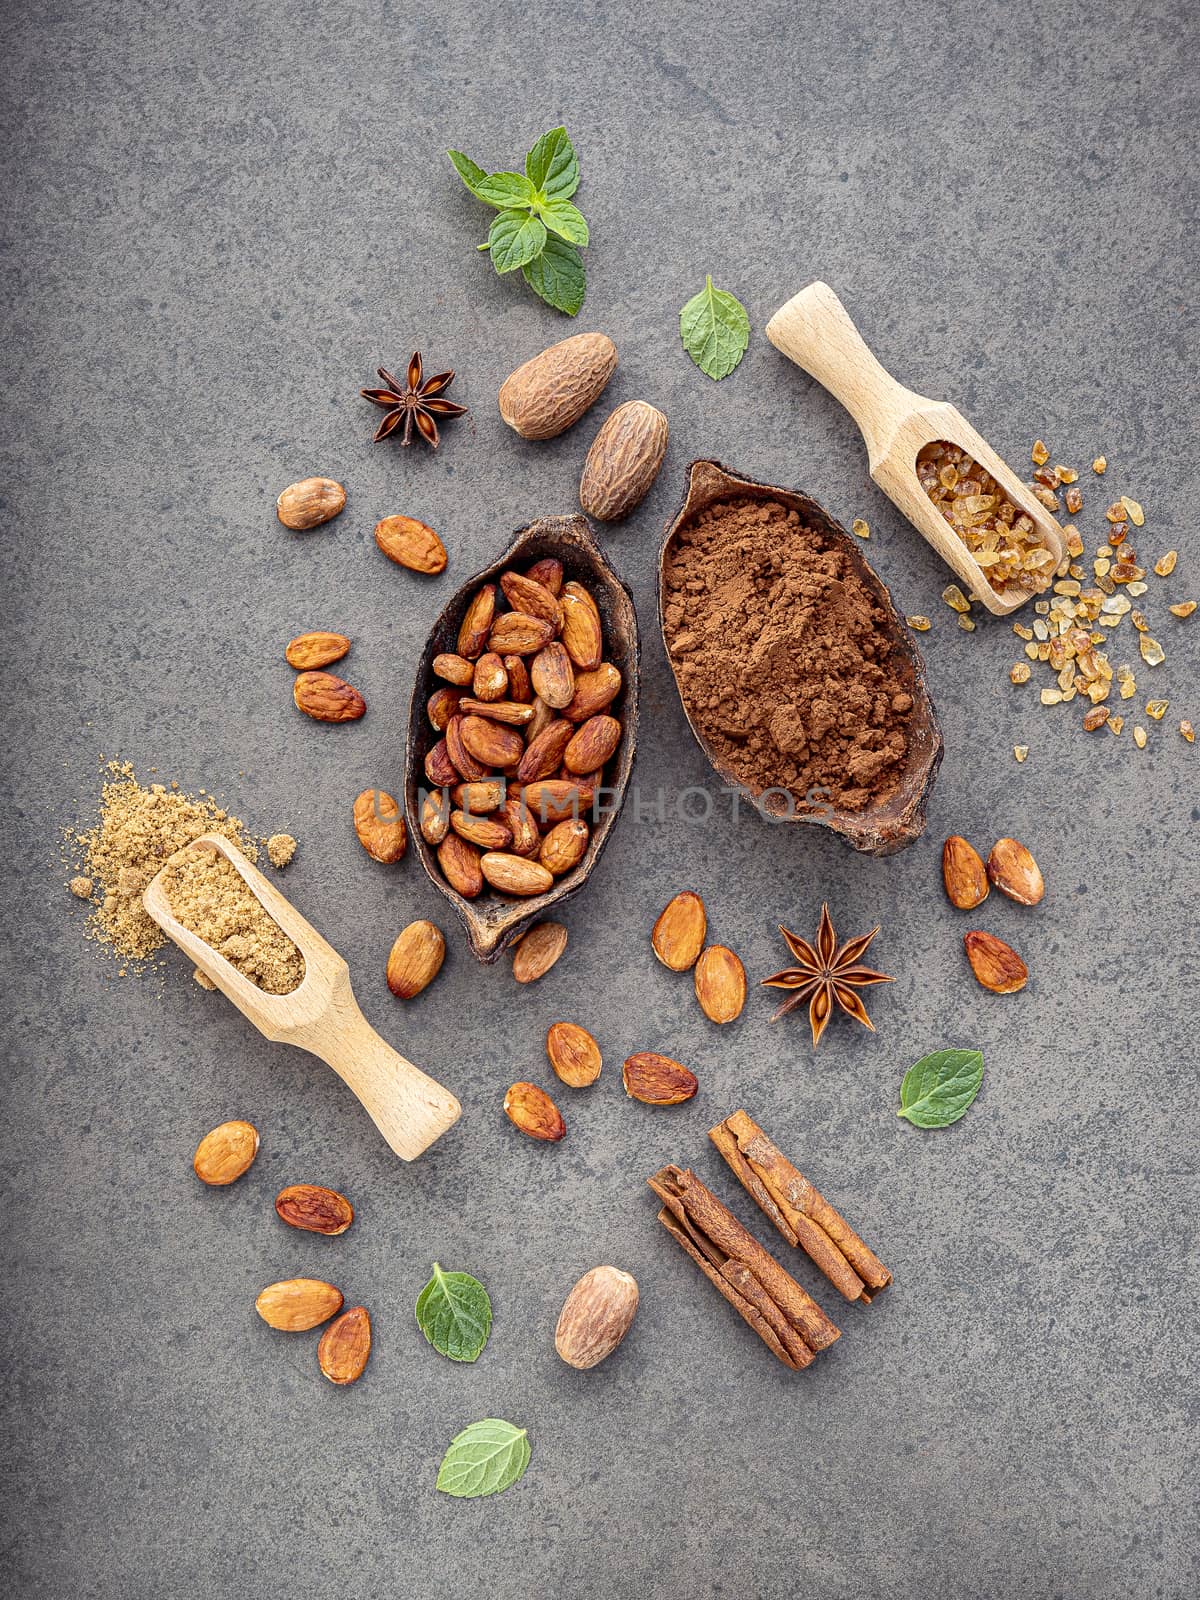 Cocoa powder and cacao beans on stone background.